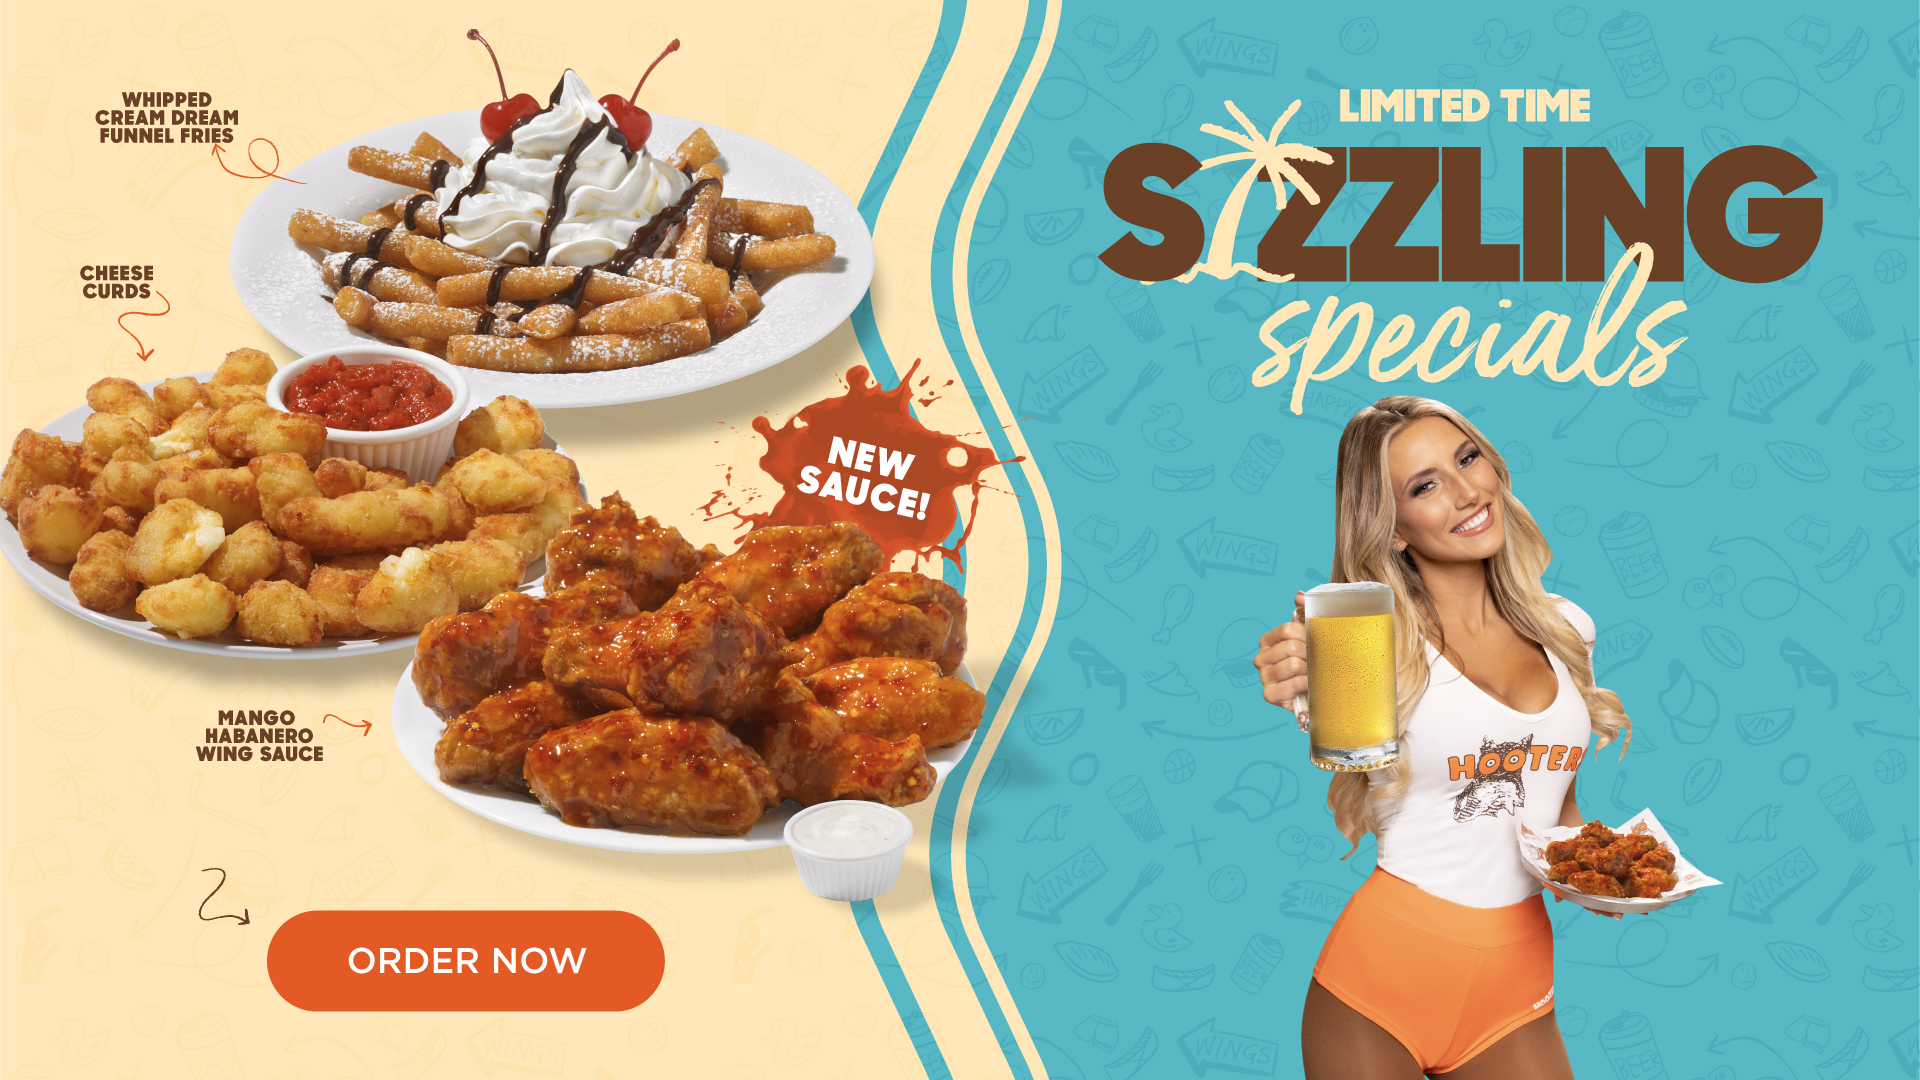 Limited time sizzling specials!